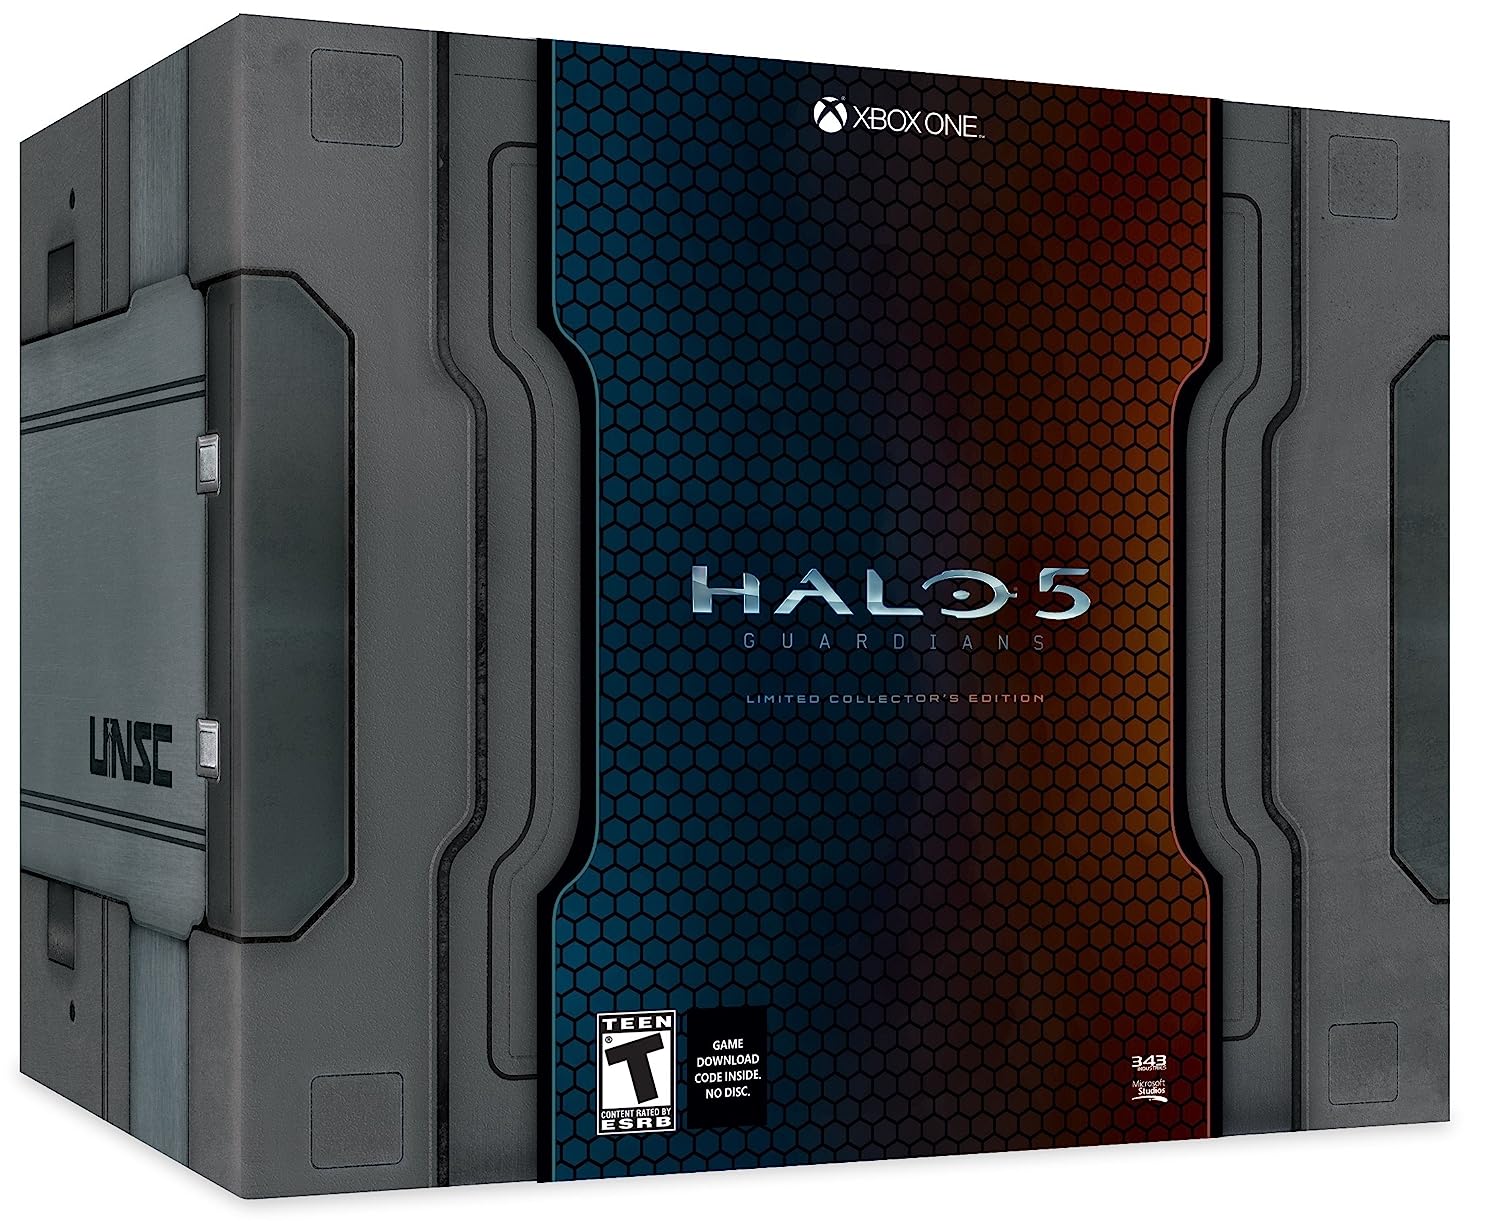 Halo 5: Guardians Limited Edition Collector's Edition – Xbox One [No Disc Included] - $97